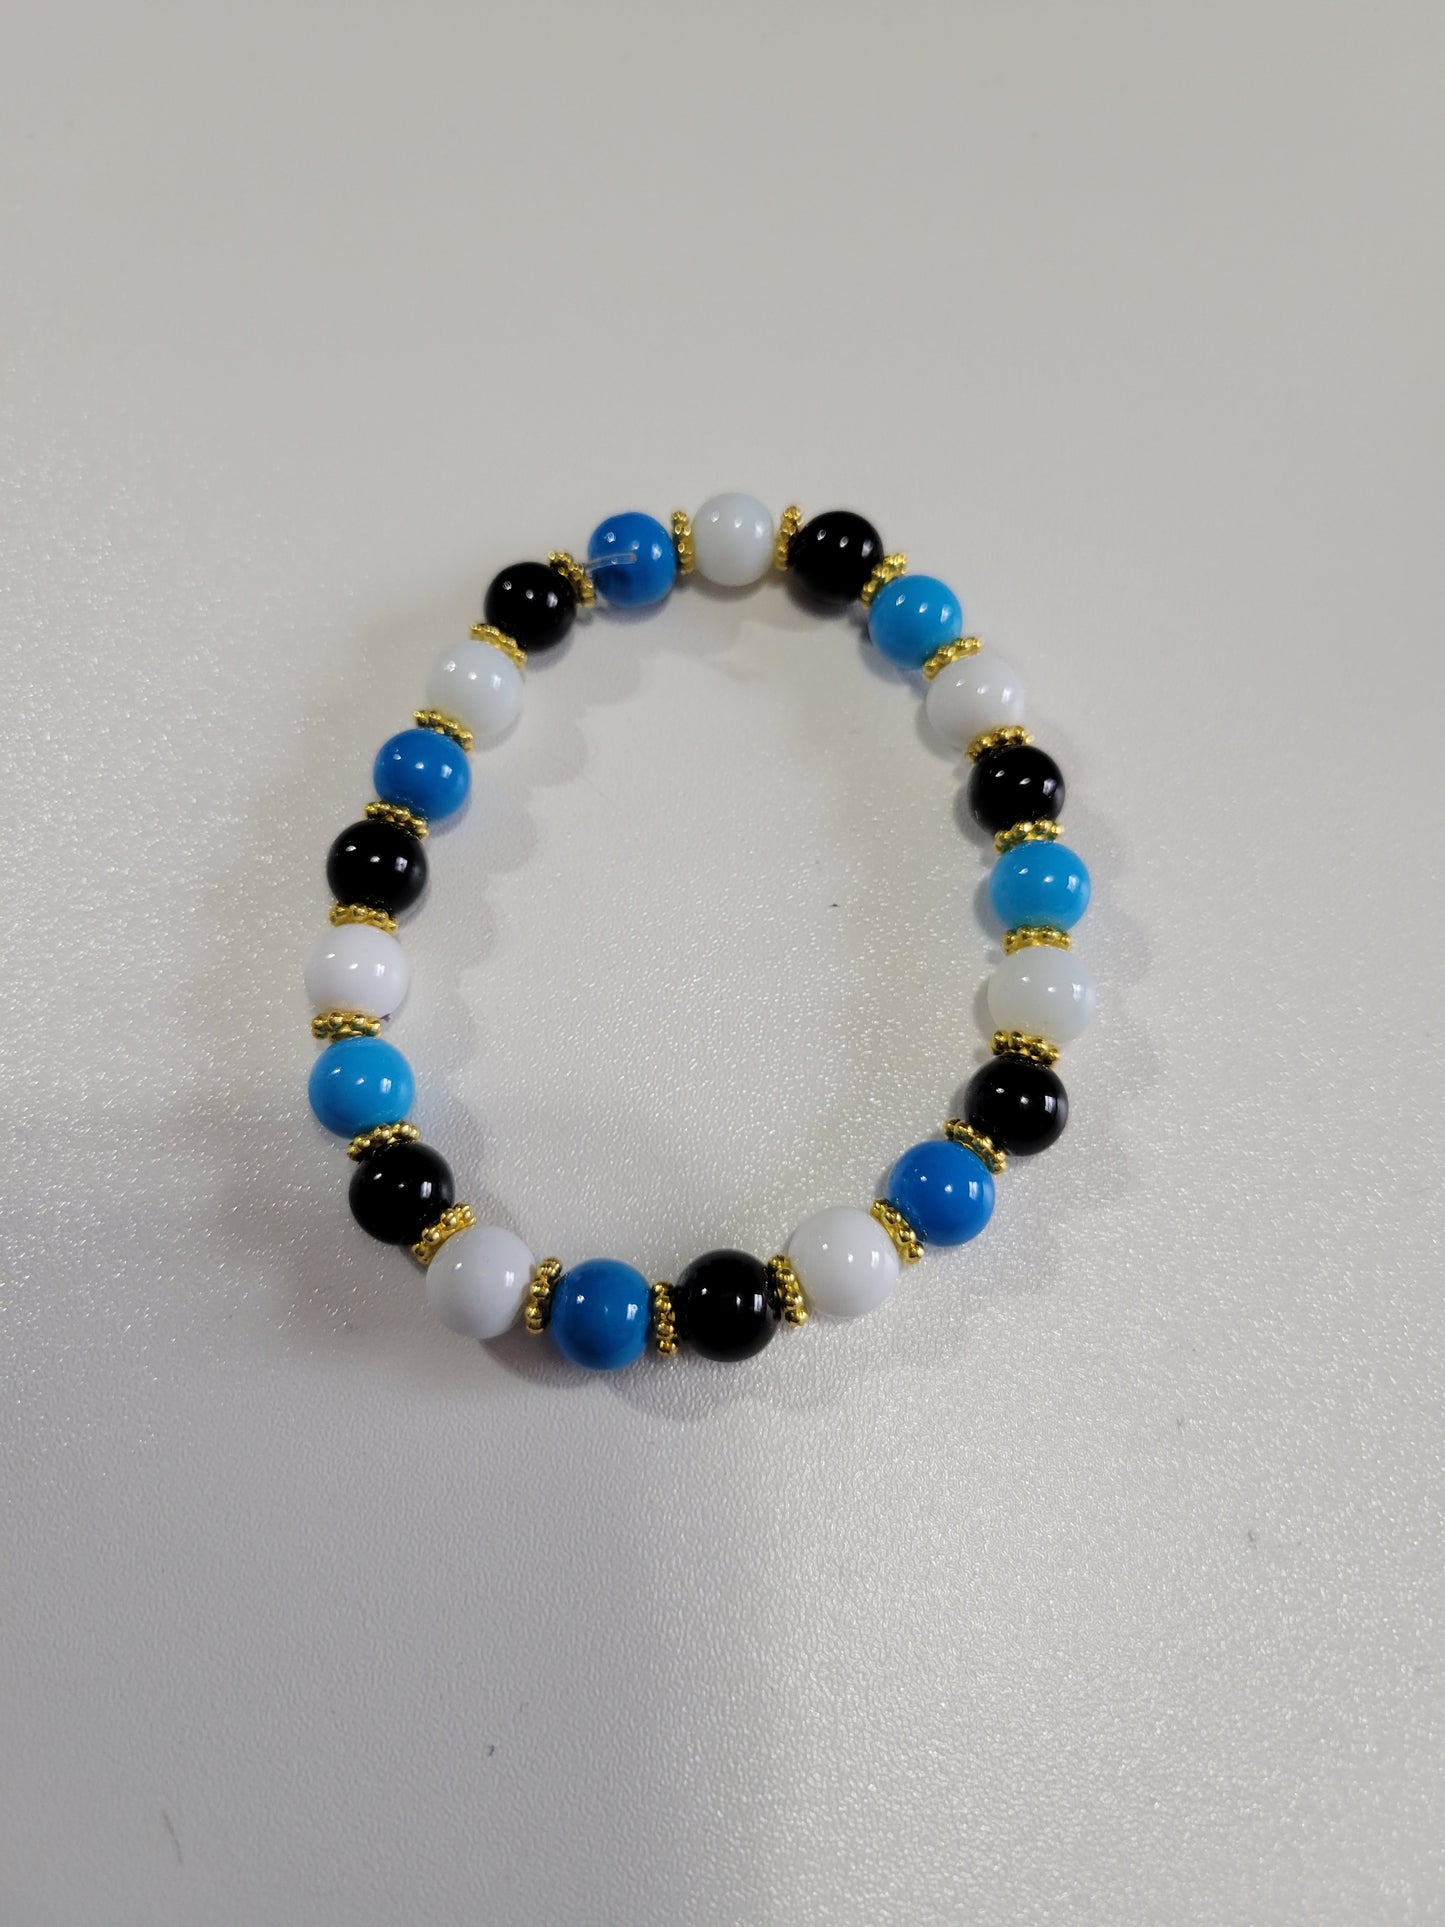 Blue, White and Black with Gold Spacers | Beaded Bracelet